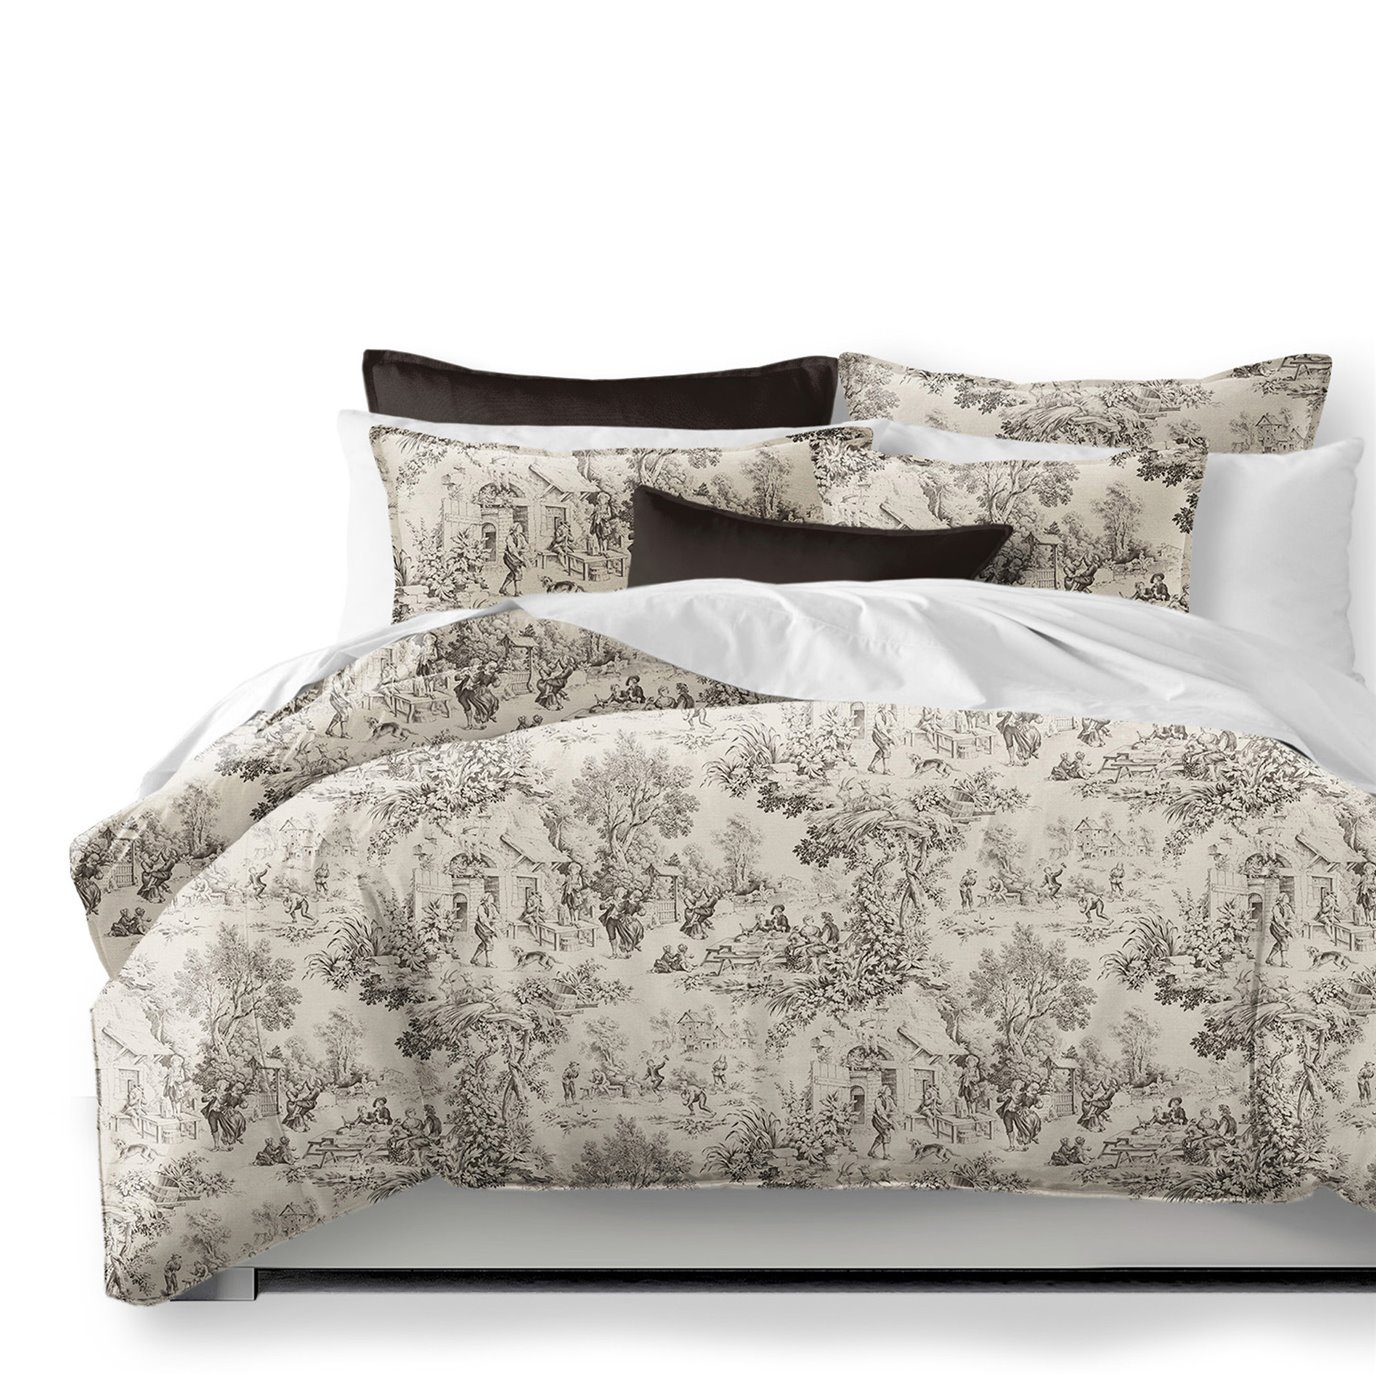 Maison Toile Sepia Comforter and Pillow Sham(s) Set - Size Queen